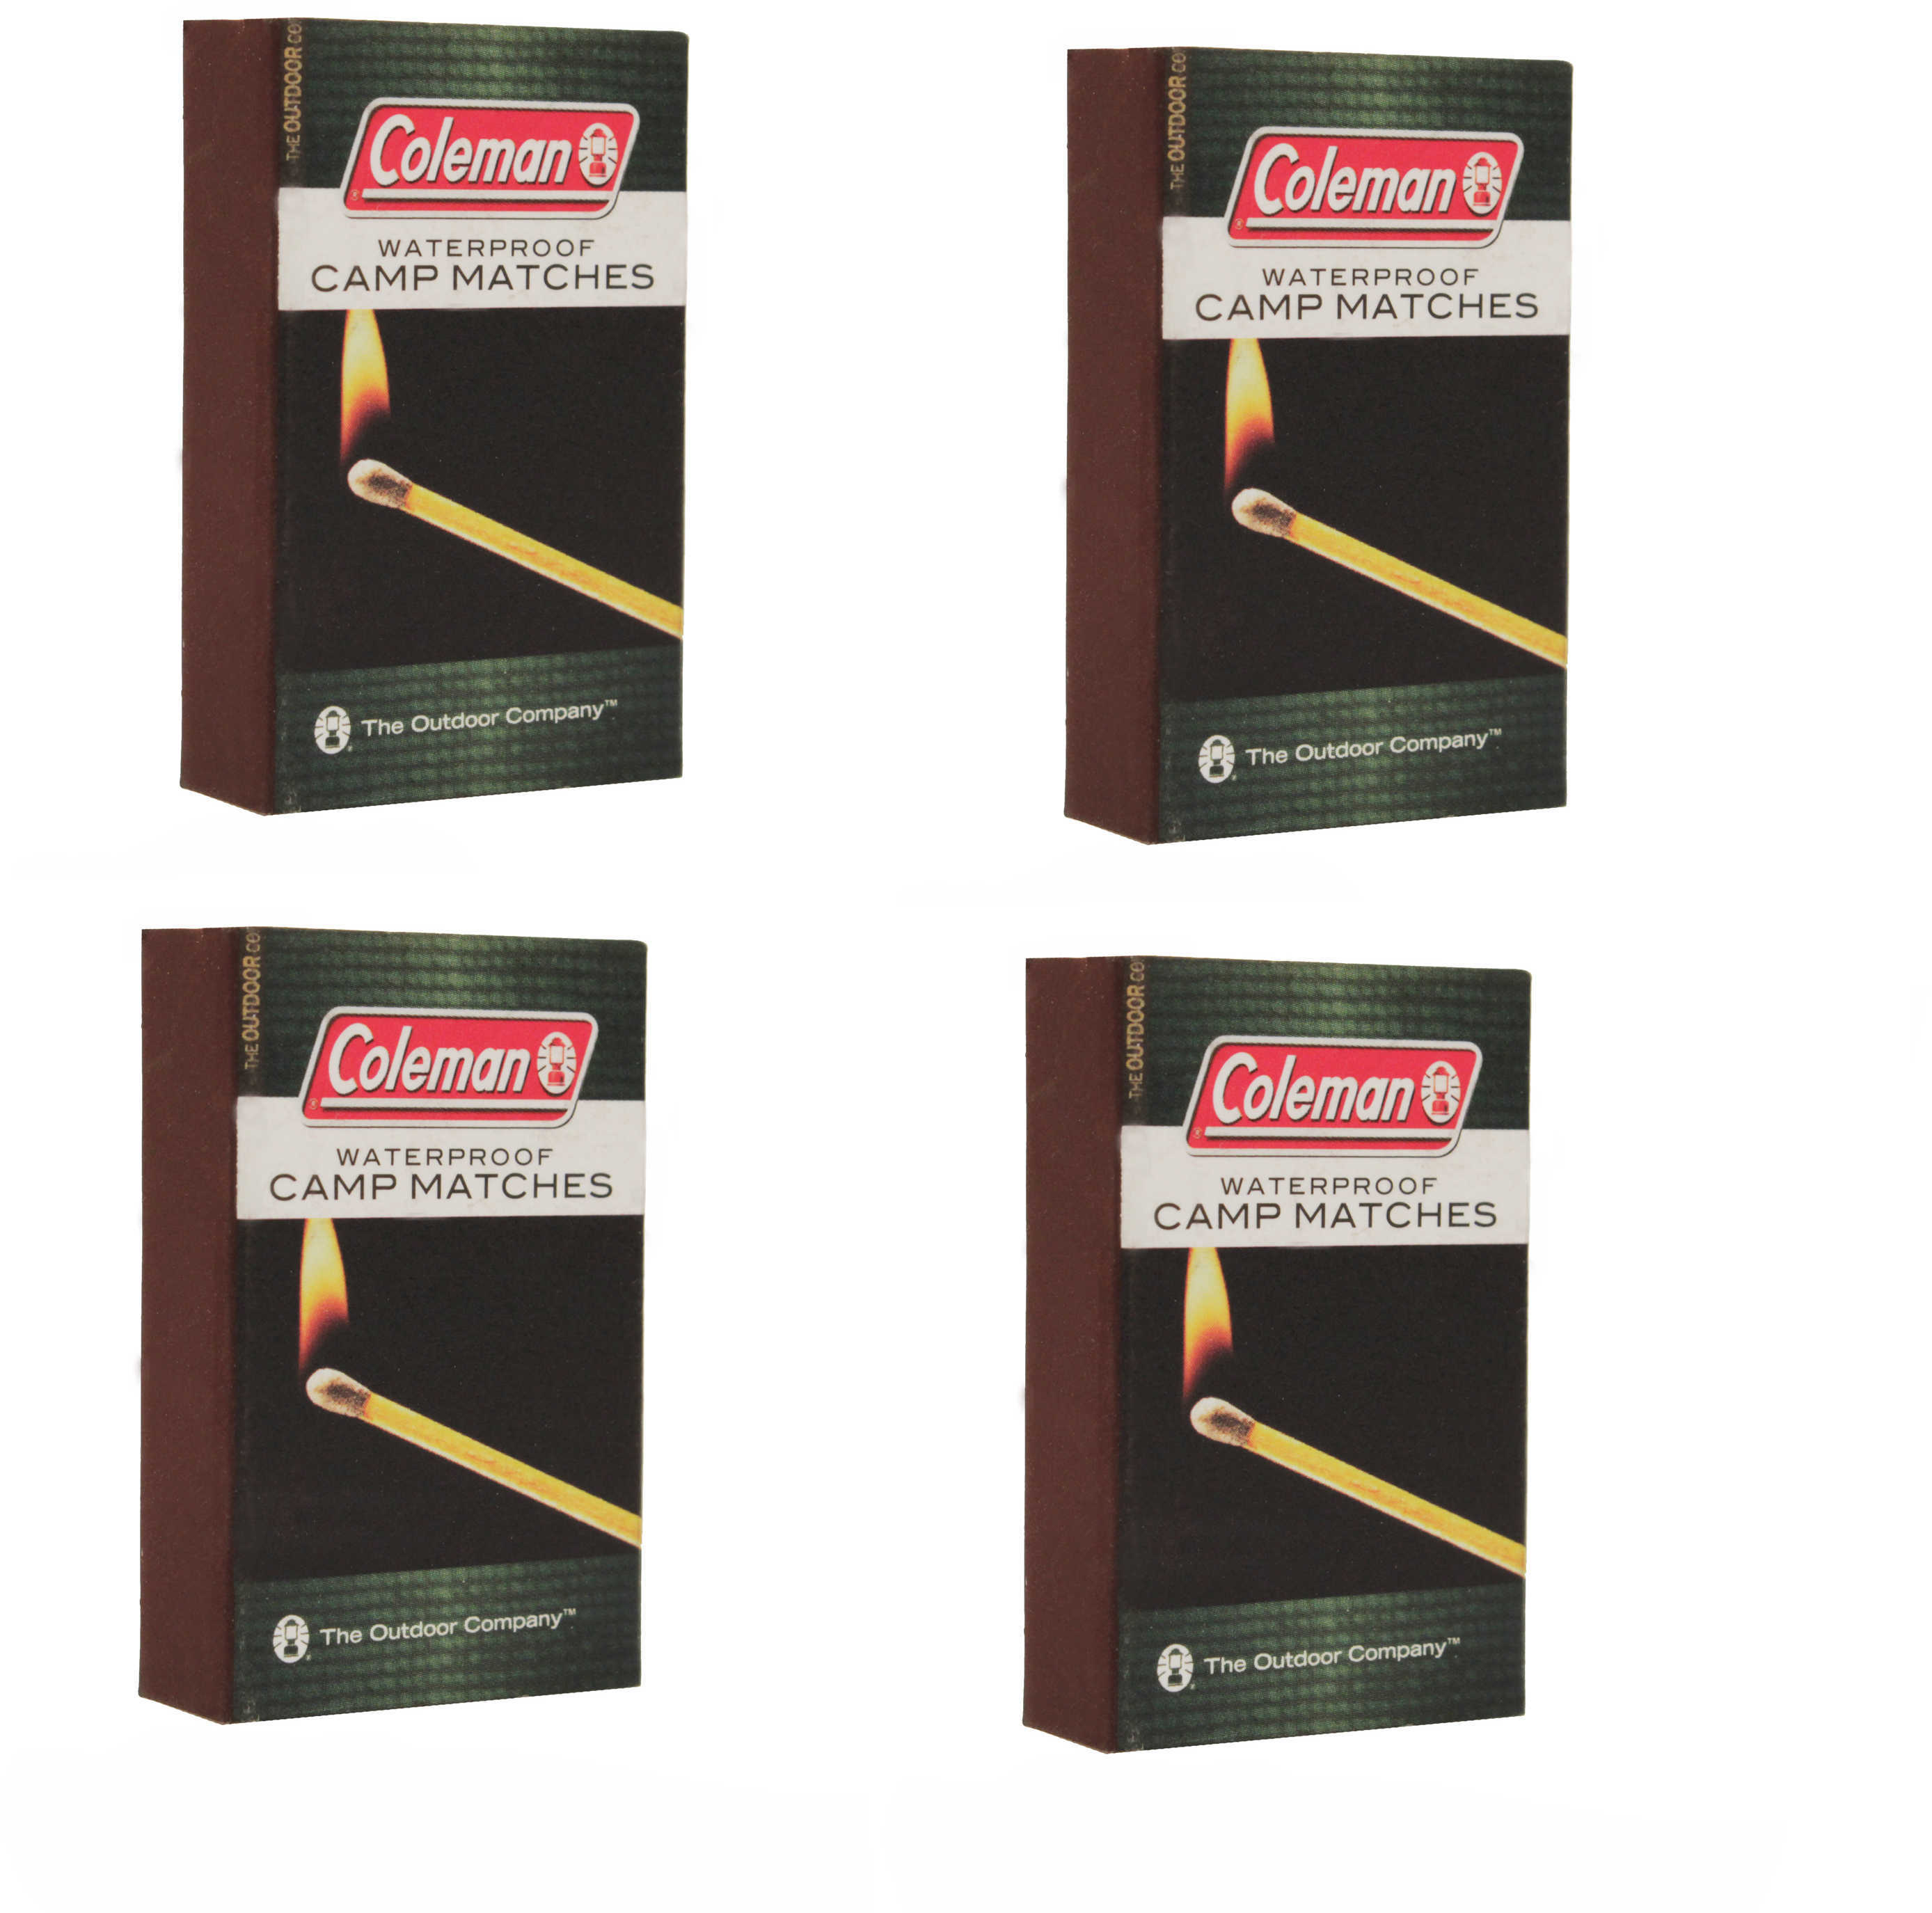 Coleman Matches Waterproof Md: 2000015174